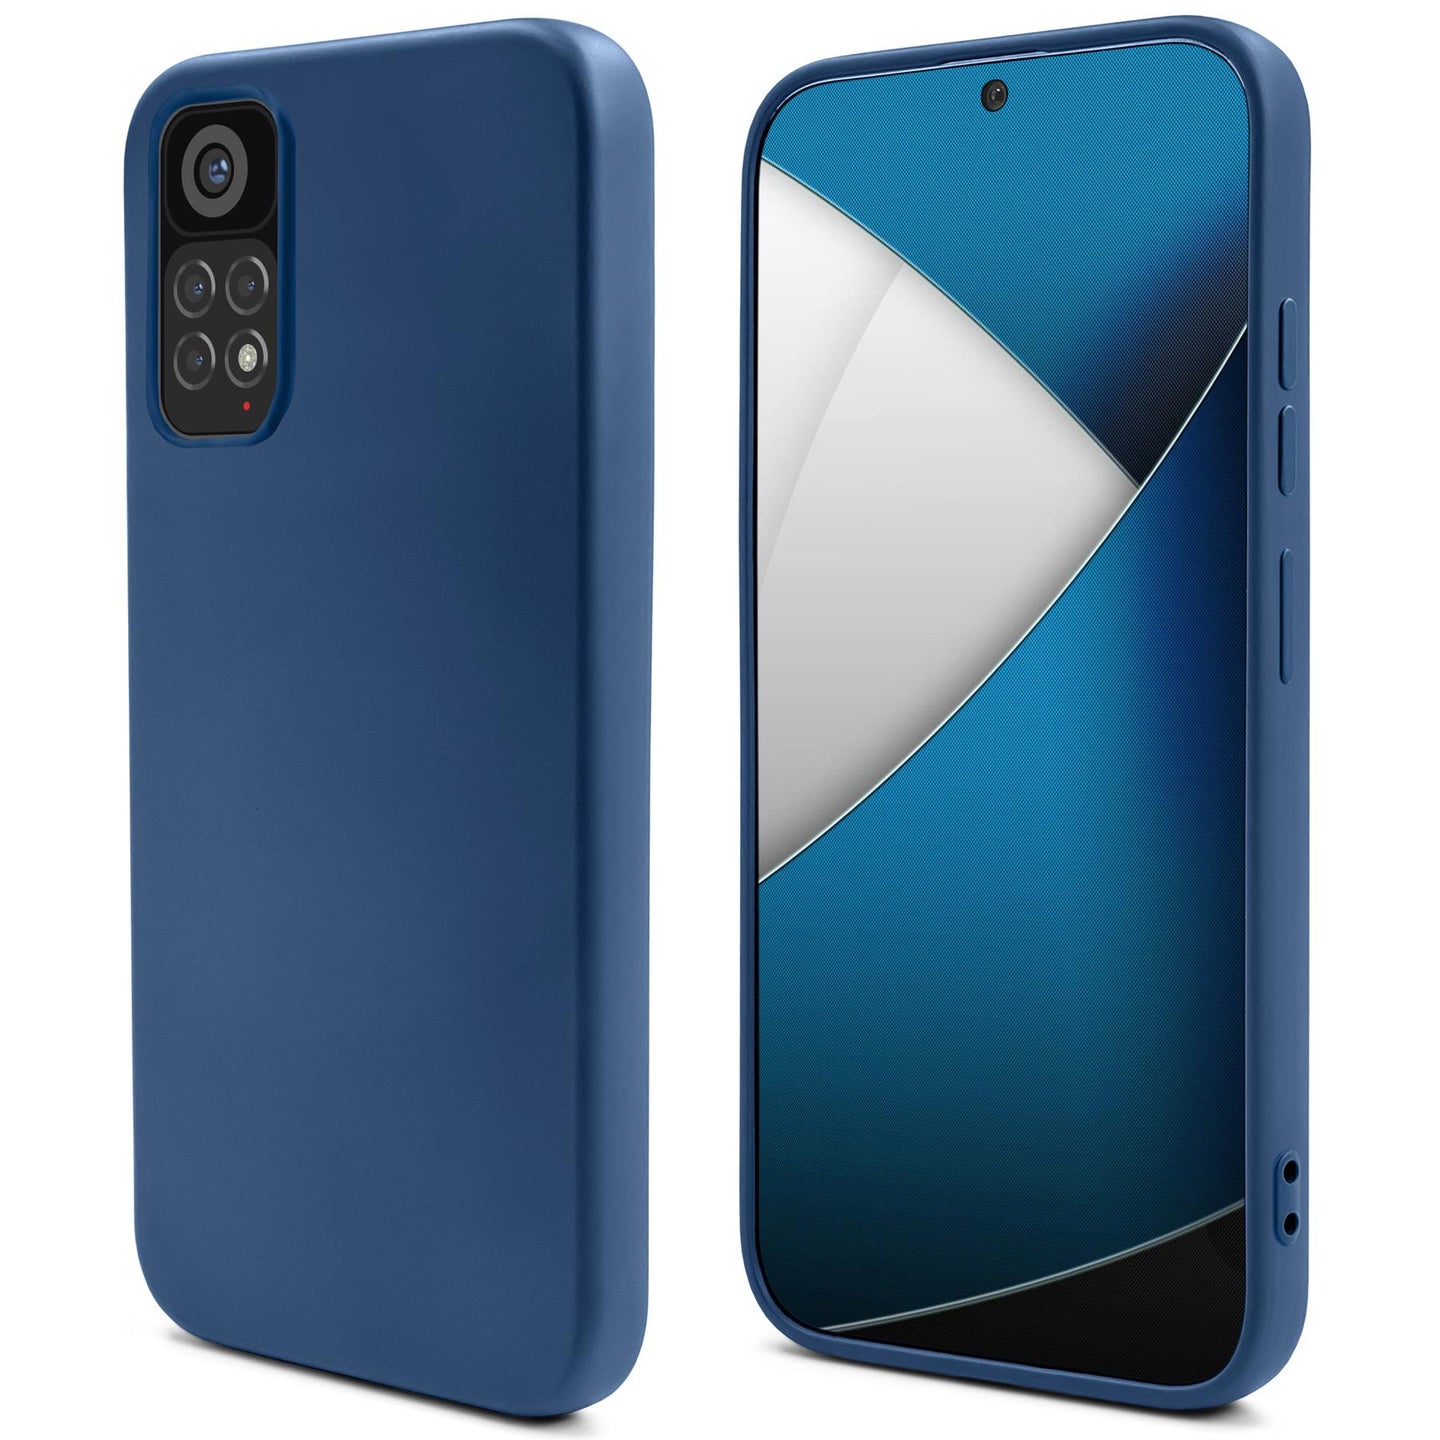 Moozy Lifestyle. Silicone Case for Xiaomi Redmi Note 11 and 11S, Midnight Blue - Liquid Silicone Lightweight Cover with Matte Finish and Soft Microfiber Lining, Premium Silicone Case